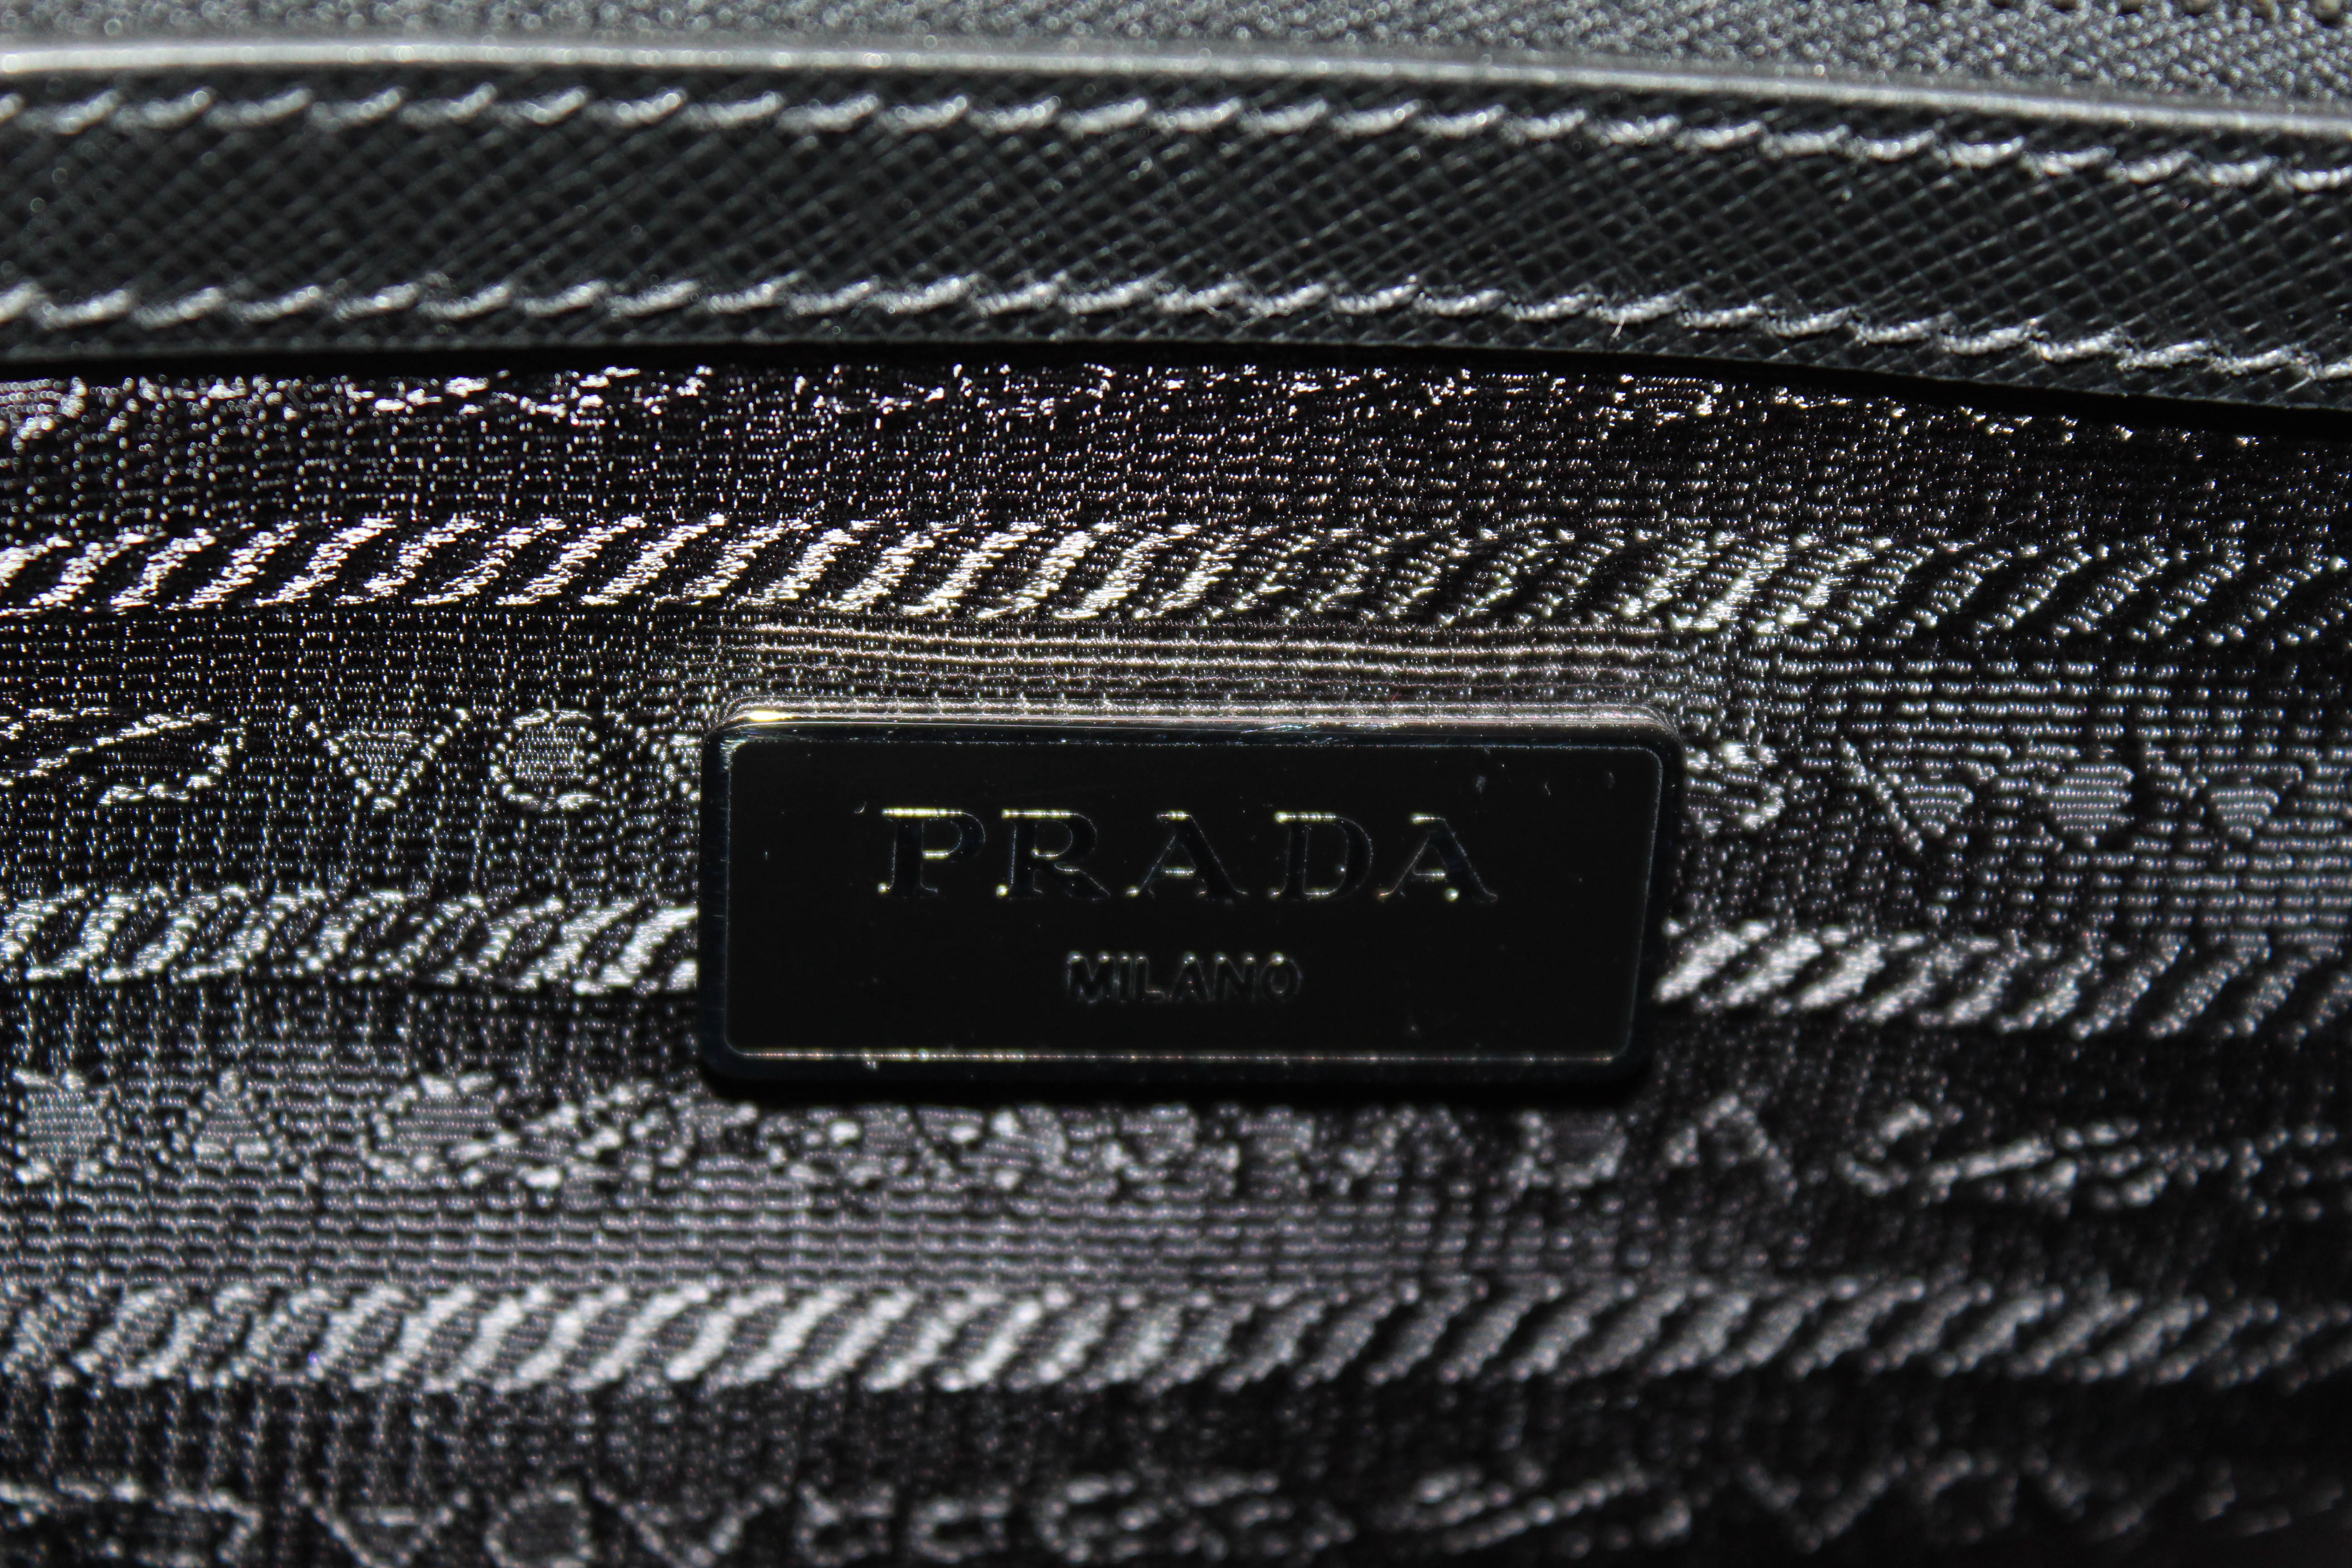 Prada orig Preowned WithAuthenticity Card Black nylon Bag White Stained  Inside